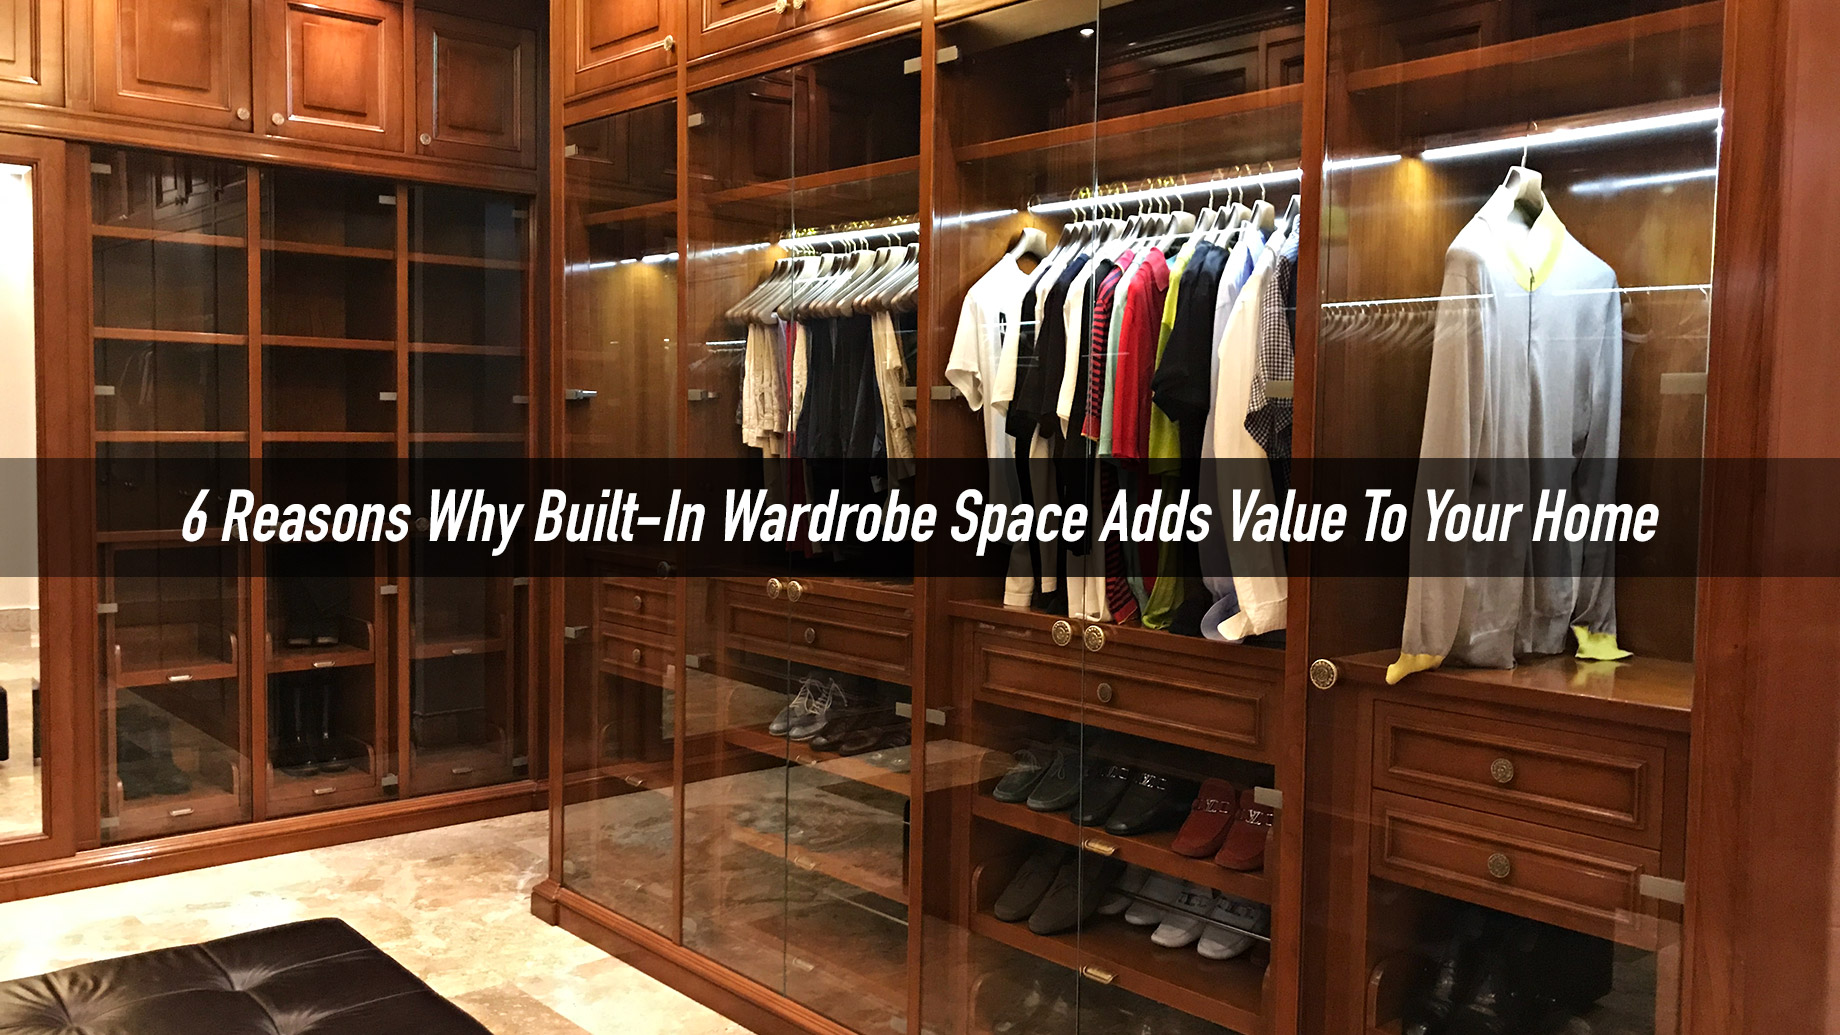 6 Reasons Why Built-In Wardrobe Space Adds Value To Your Home